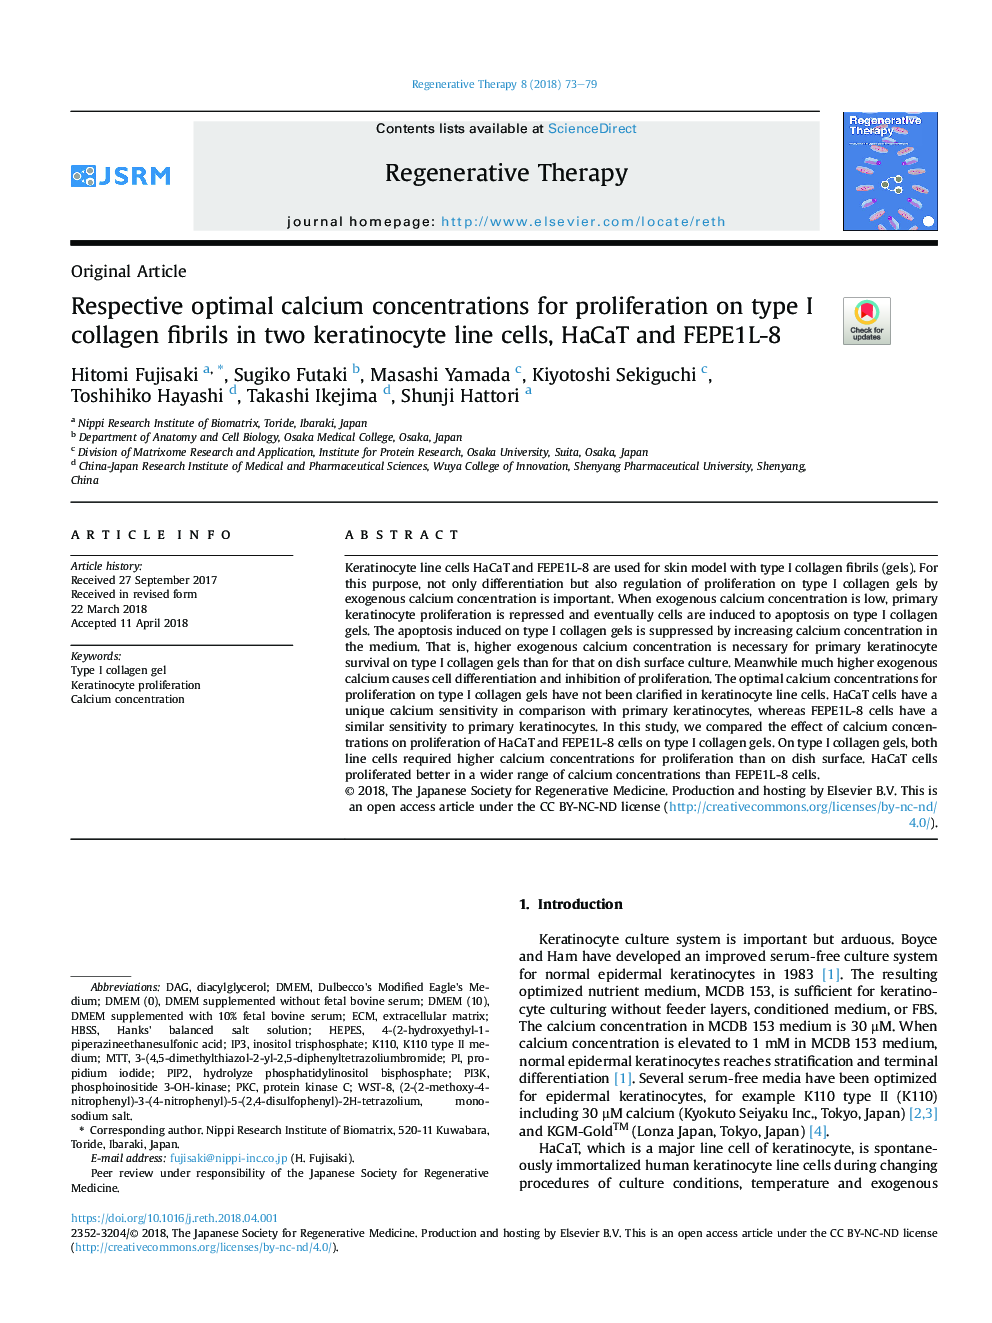 Respective optimal calcium concentrations for proliferation on type I collagen fibrils in two keratinocyte line cells, HaCaT and FEPE1L-8